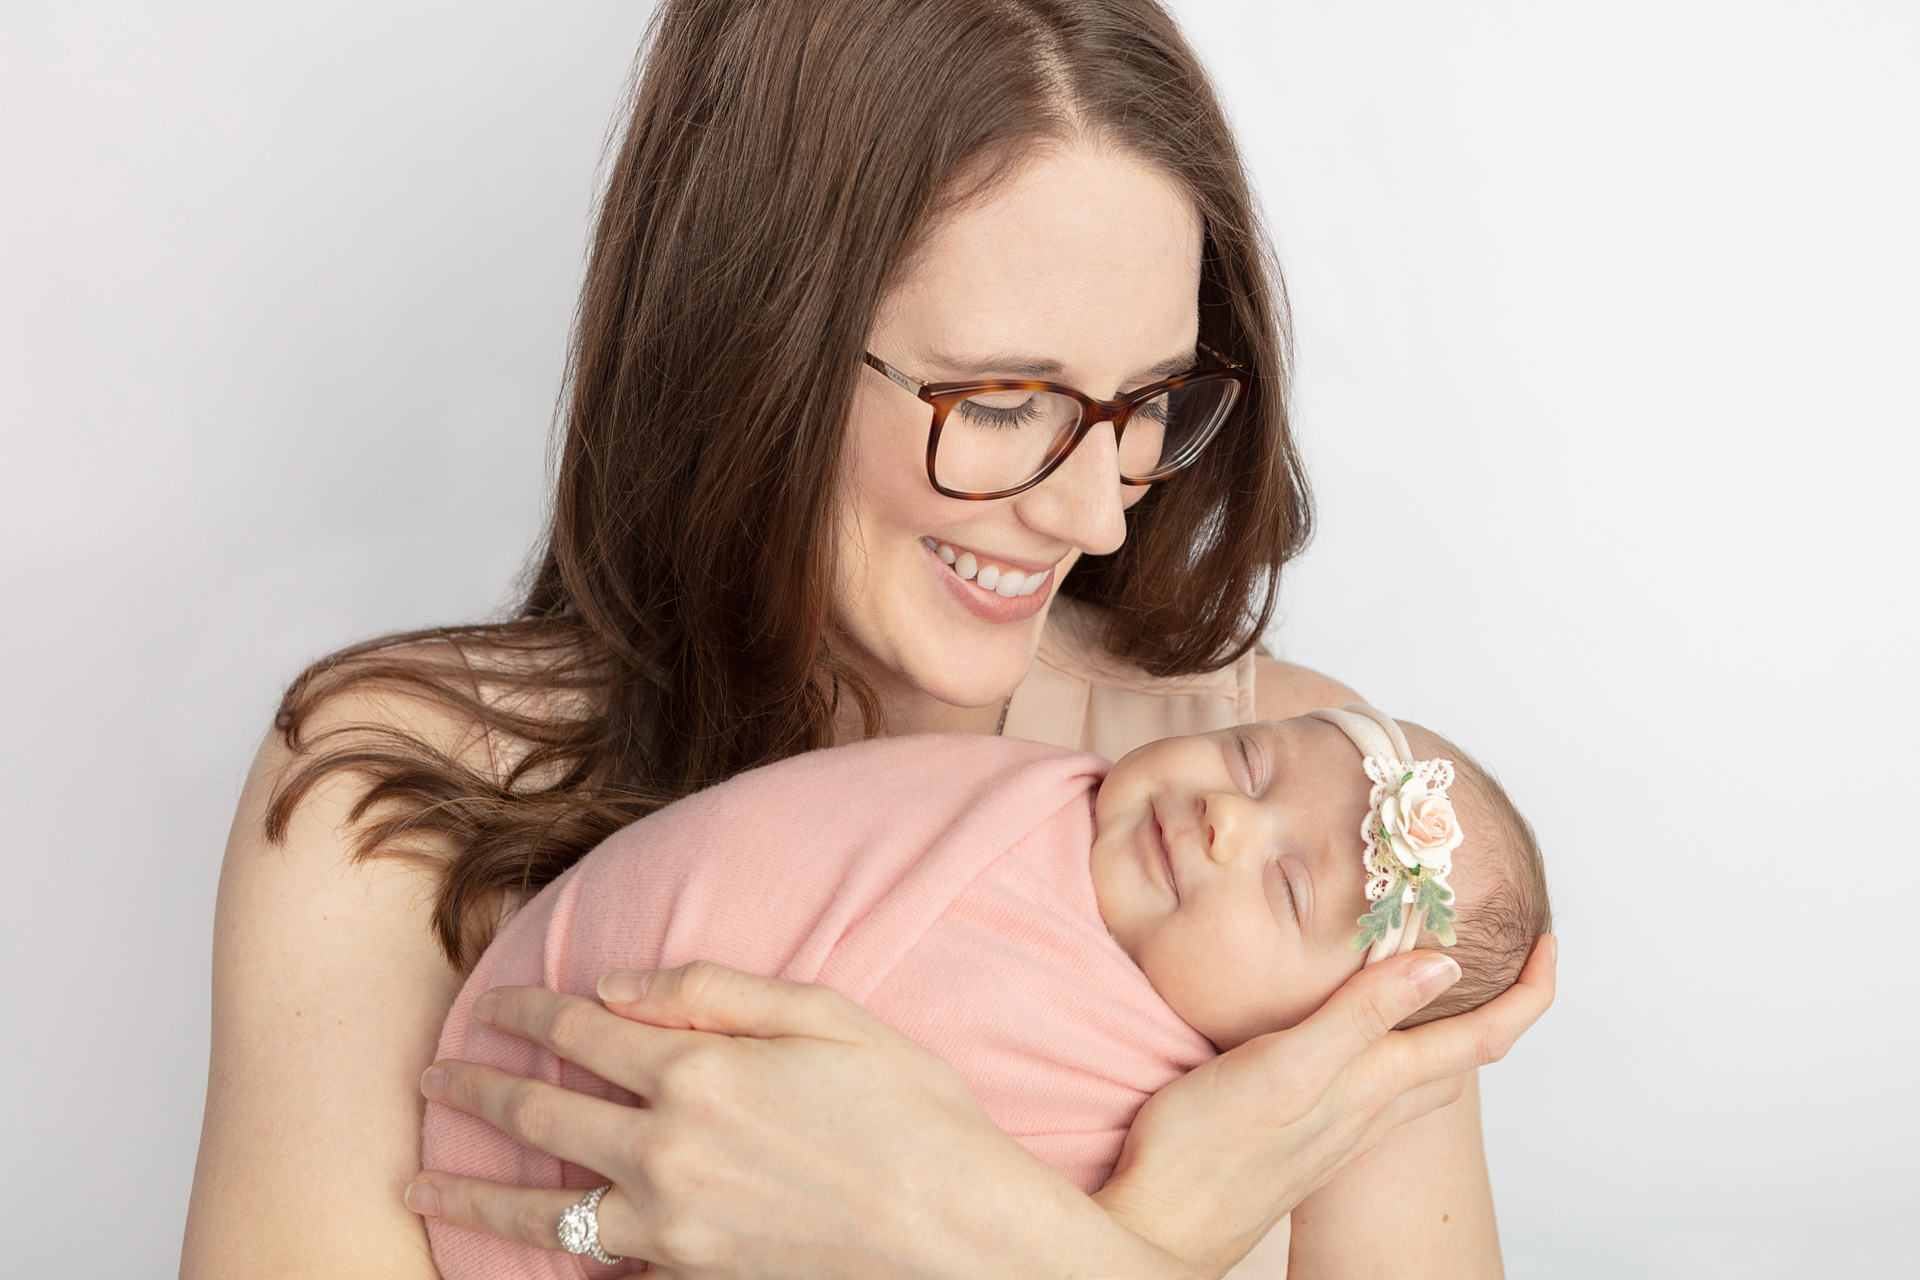 smiling new mom with auburn hair and glasses, looking down at her smiling newborn daughter